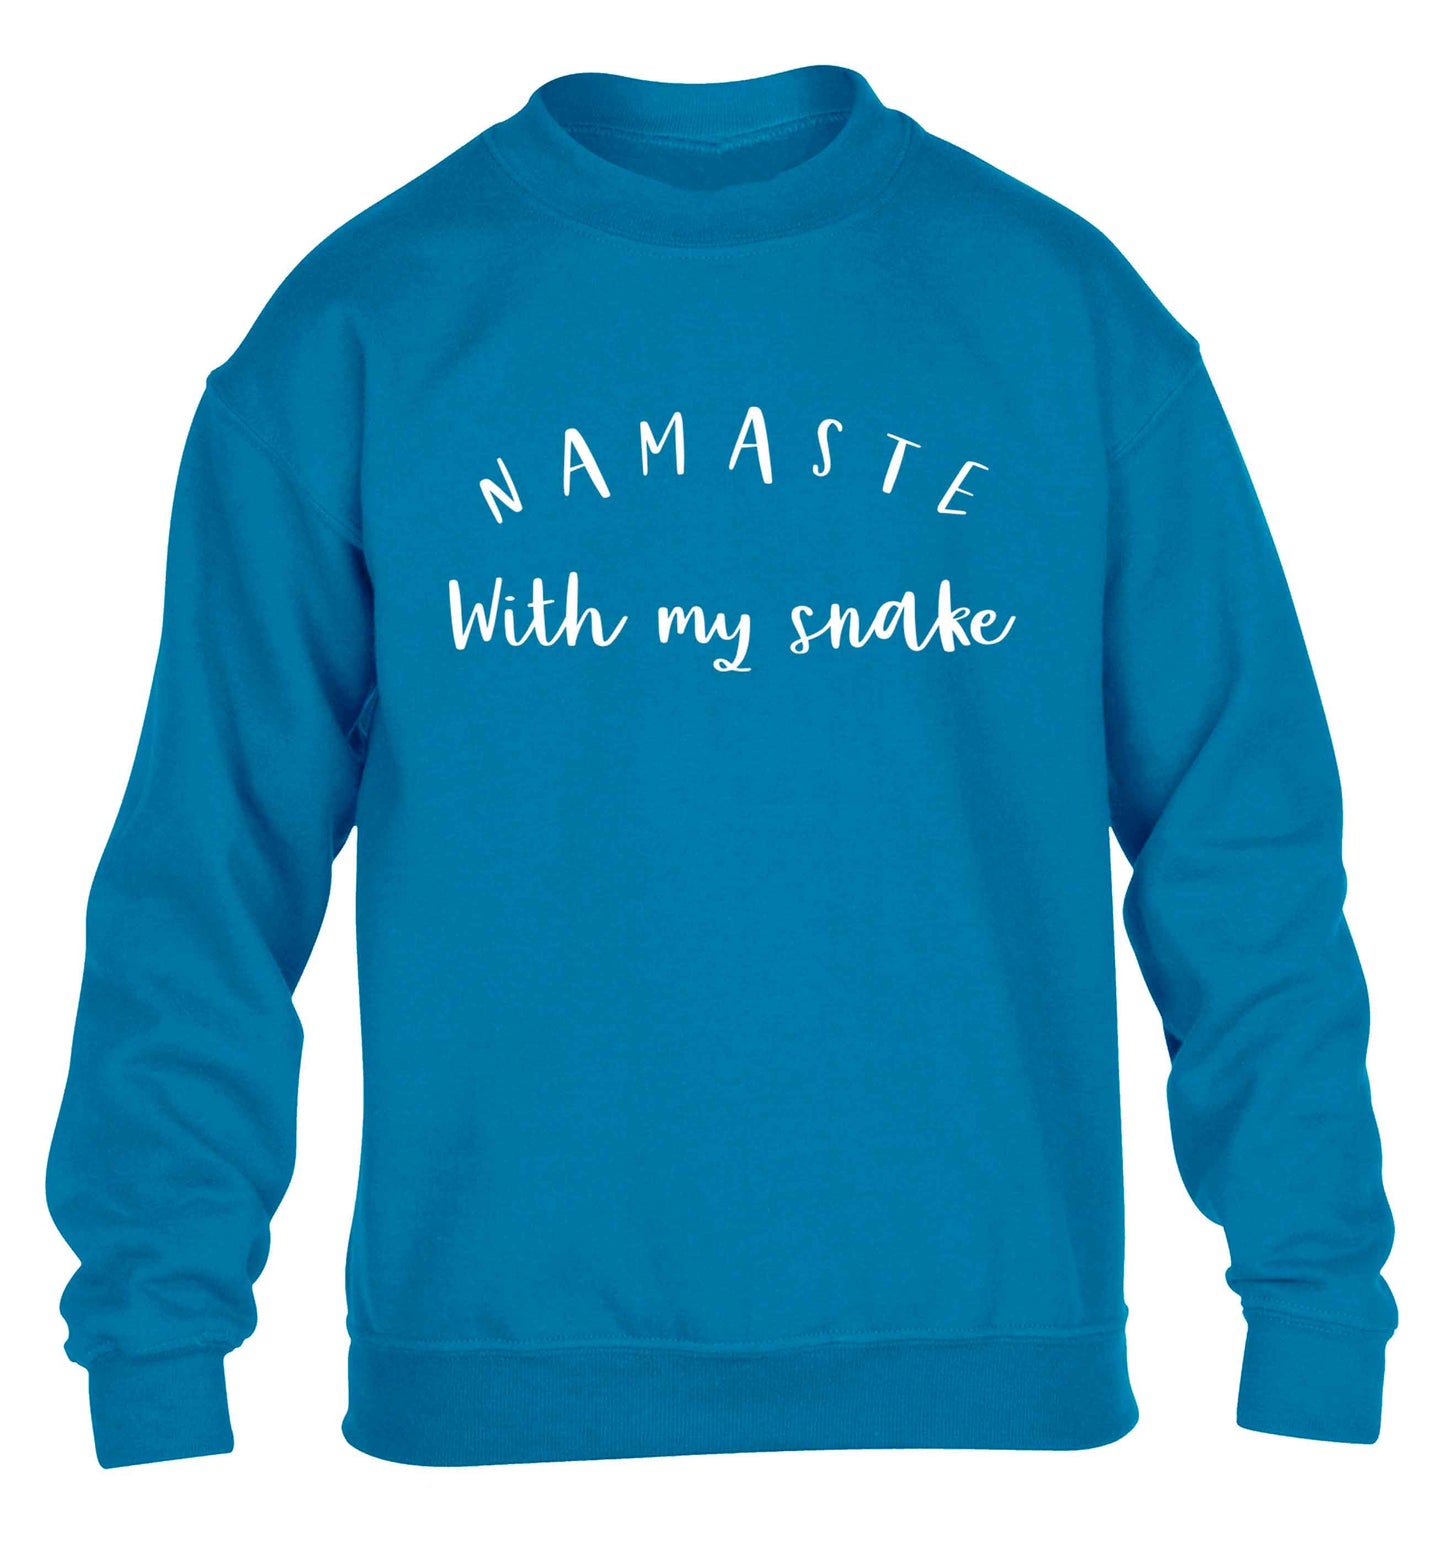 Namaste with my snake children's blue sweater 12-13 Years